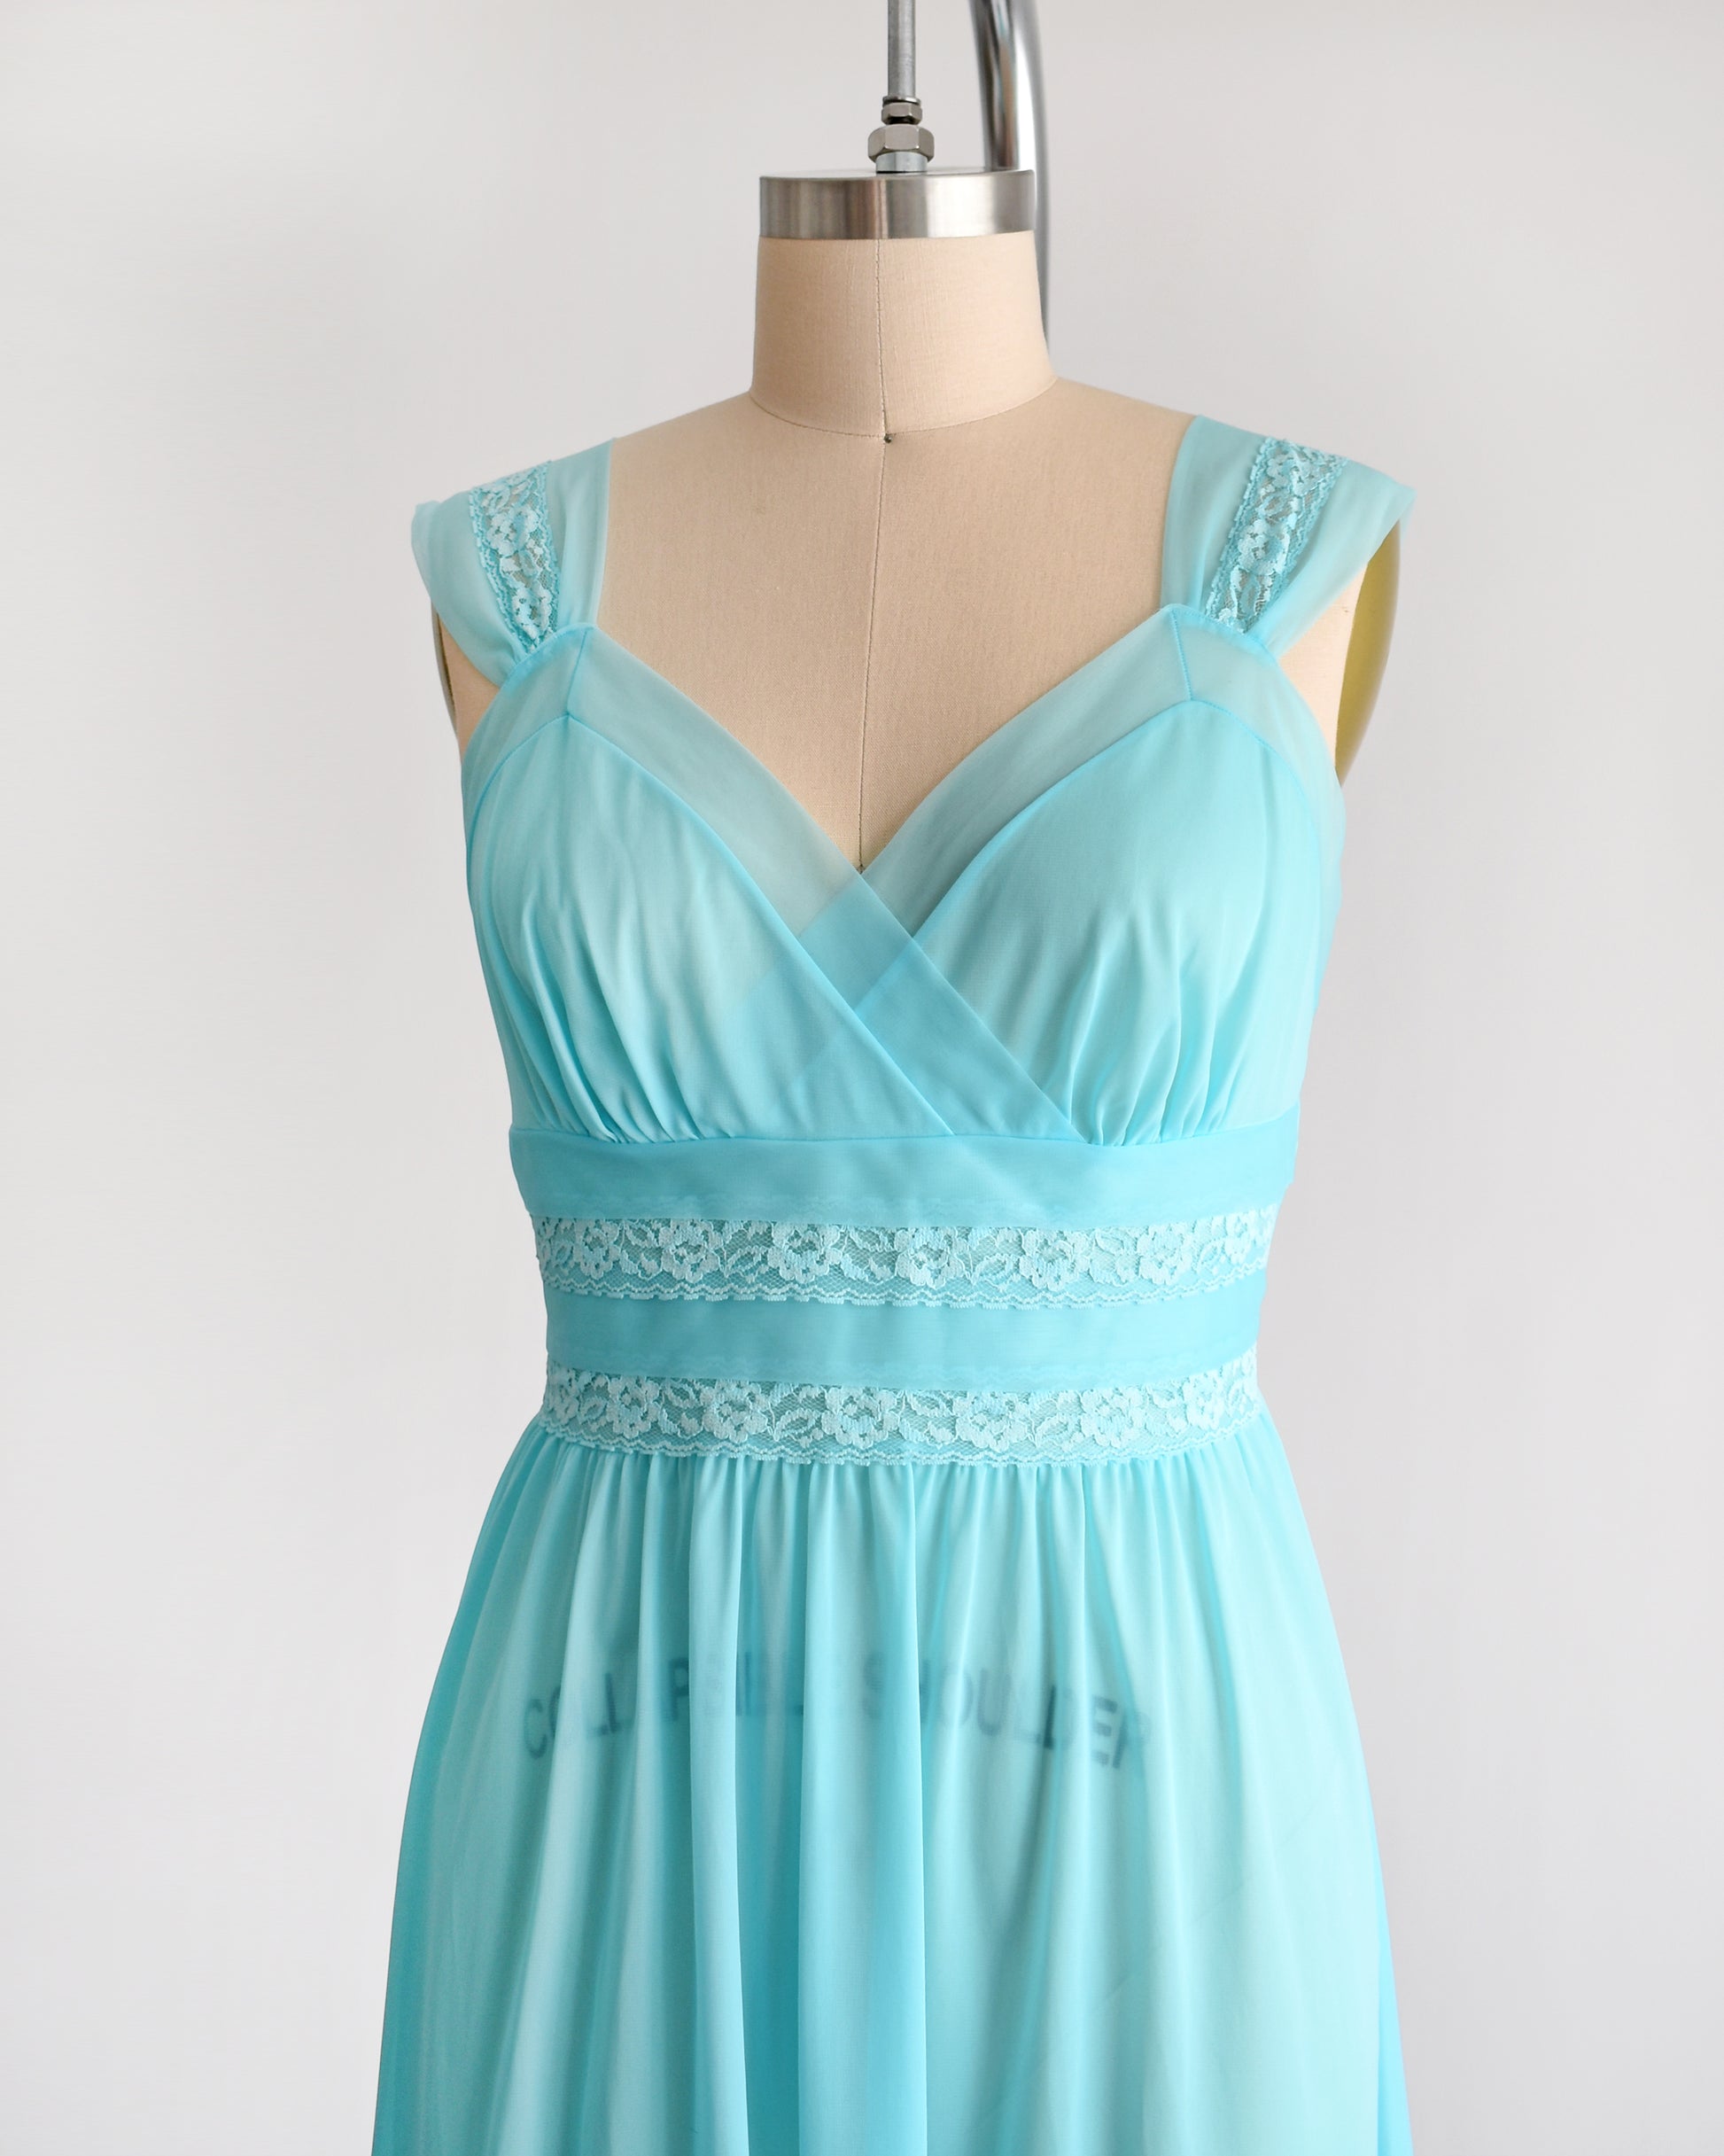 Side view of a vintage 1960s aqua blue lace nightgown with lace trim